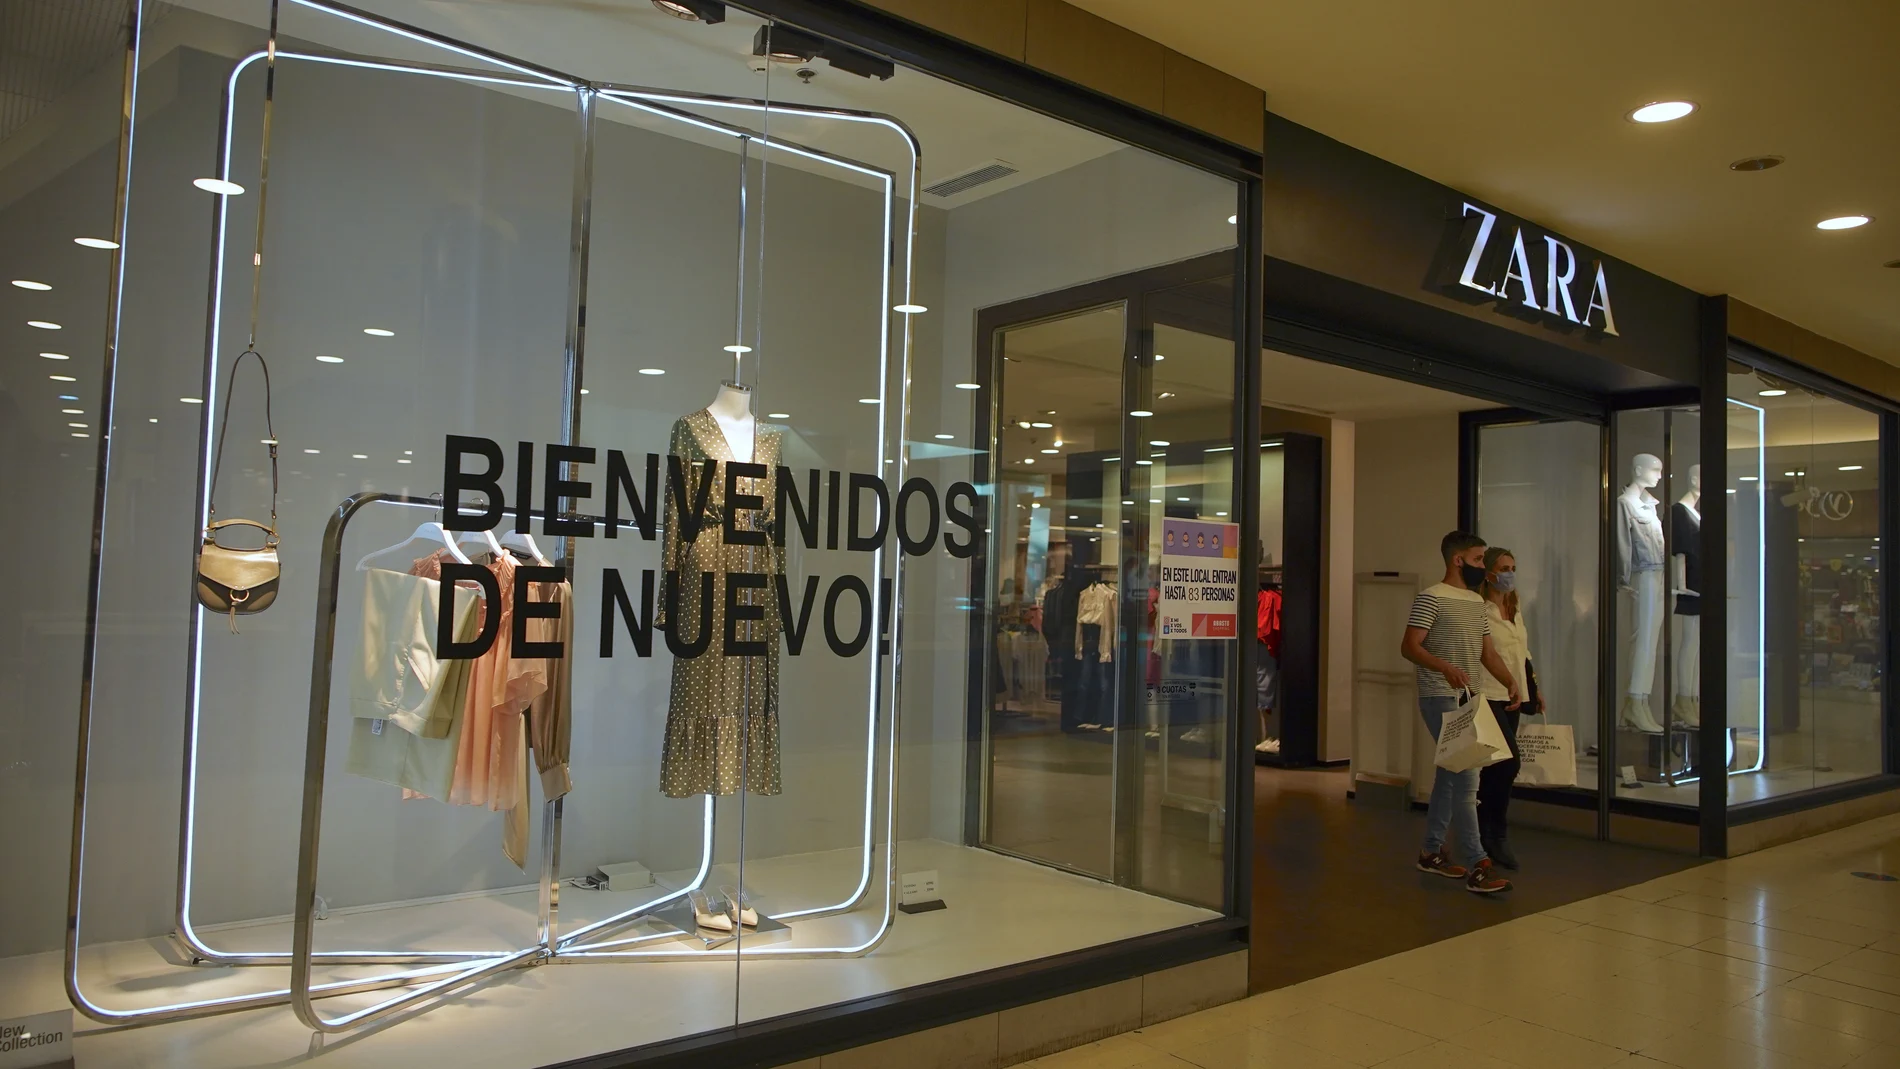 Wearing masks to curb the spread of the new coronavirus, a couple walks out of a clothing store that has a sign on a display window that reads in Spanish "Welcome back again!" at the Abasto Shopping Mall in Buenos Aires Argentina, Wednesday, Oct. 14, 2020. After seven months of closure, Buenos Aires shopping malls are reopening as the country is experiencing a spike of COVID-19 cases in the interior of the country. (AP Photo/Victor R. Caivano)